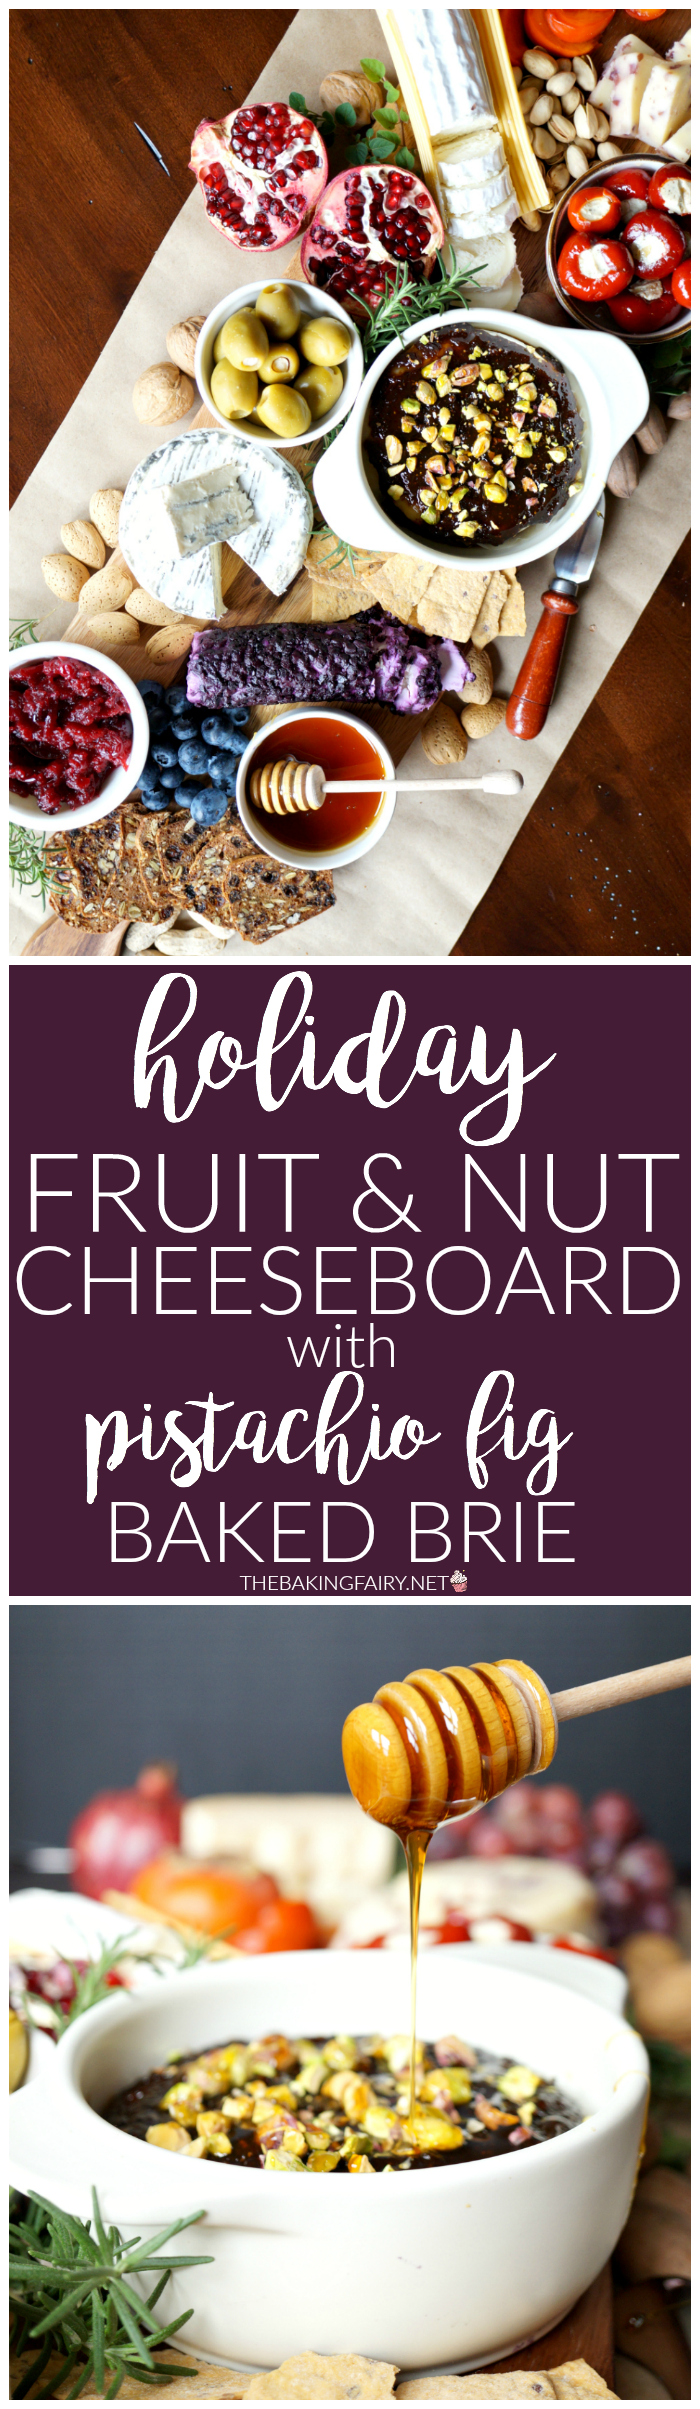 holiday fruit & nut cheese board | The Baking Fairy